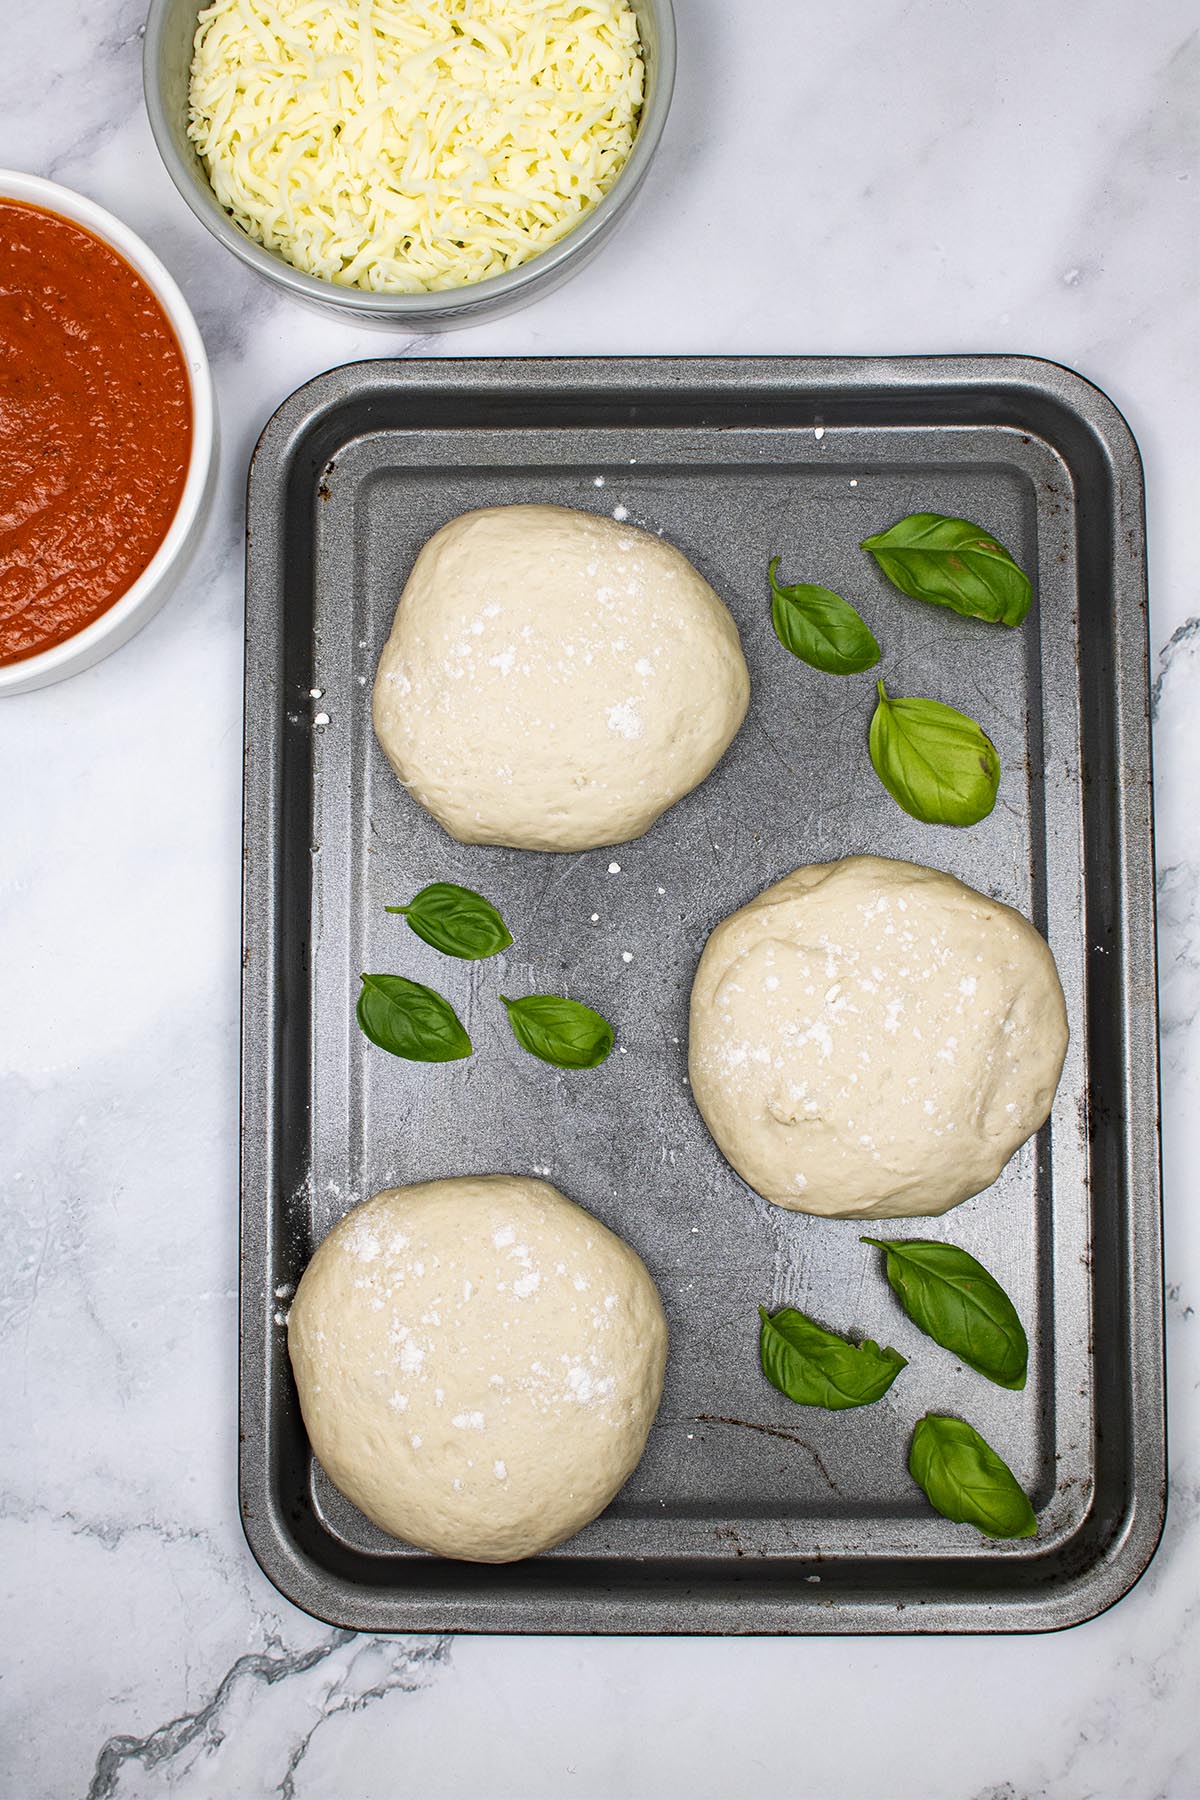 3 balls of pizza dough on baking tray scattered with basil leaves and dishes of pizza sauce and grated mozzarella in the background